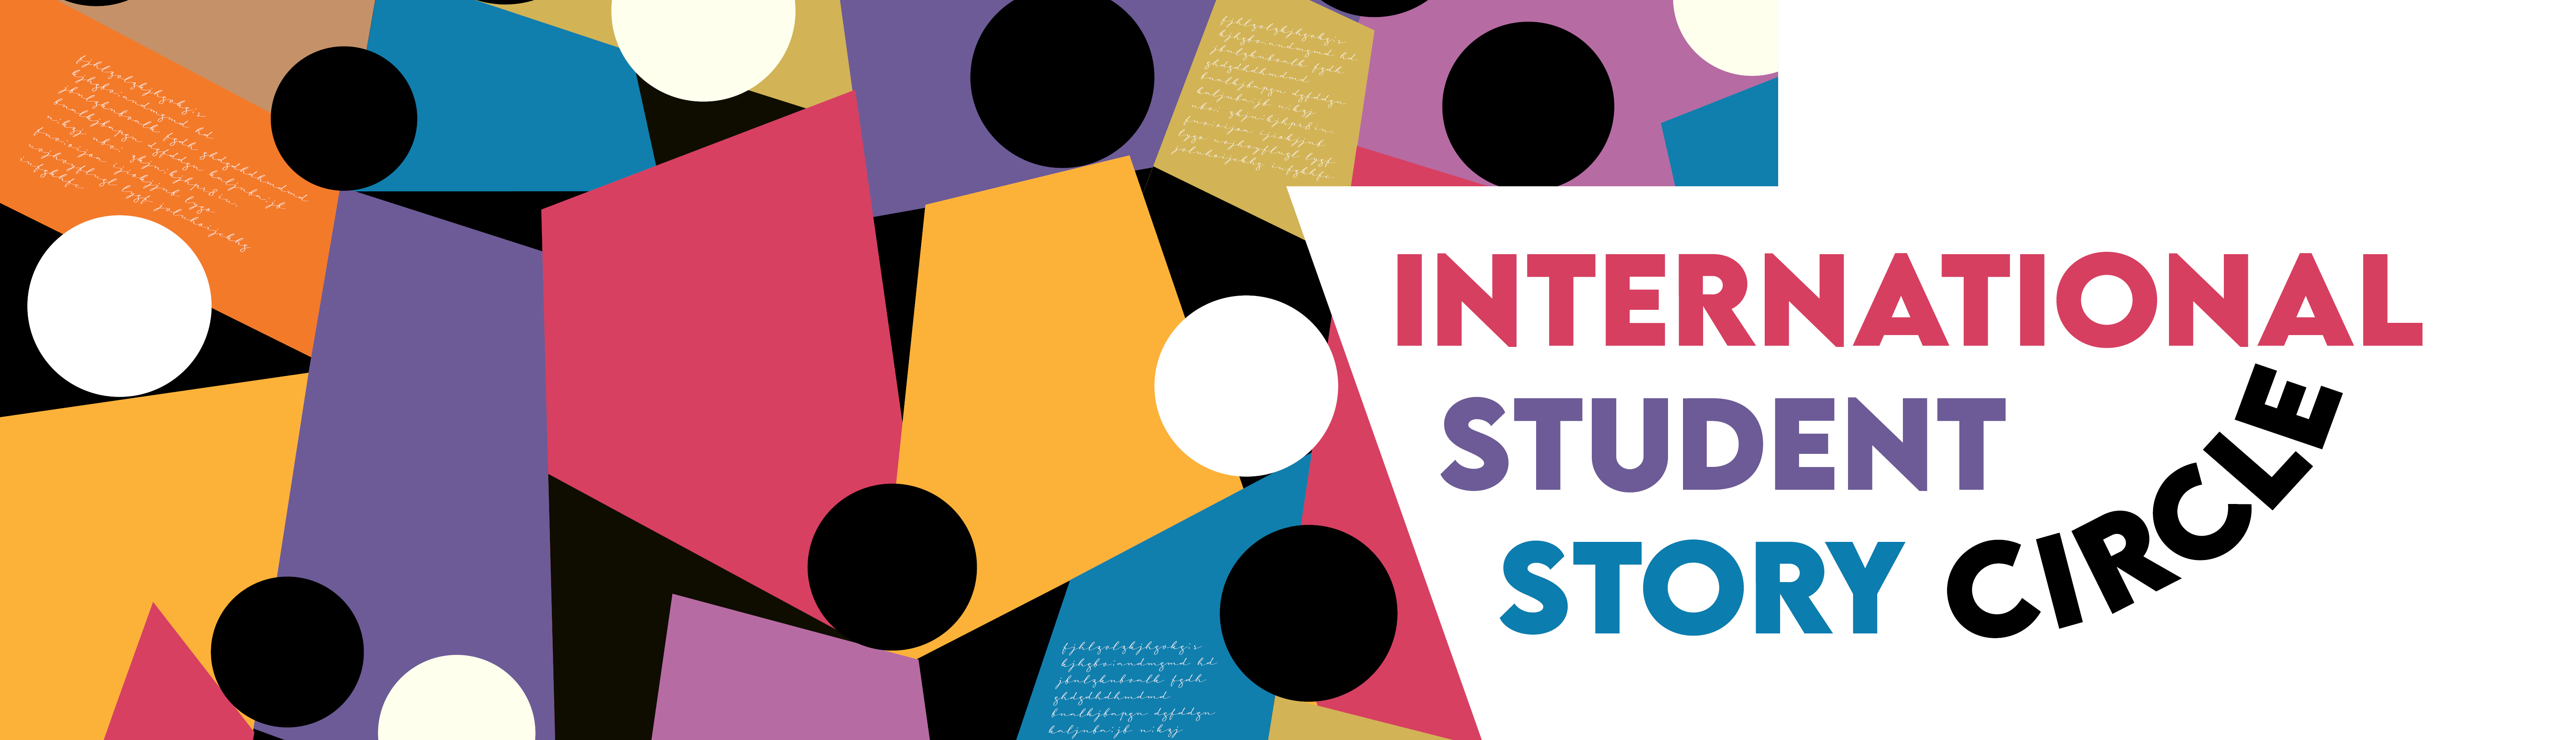 Call for International Student Story Submissions! 